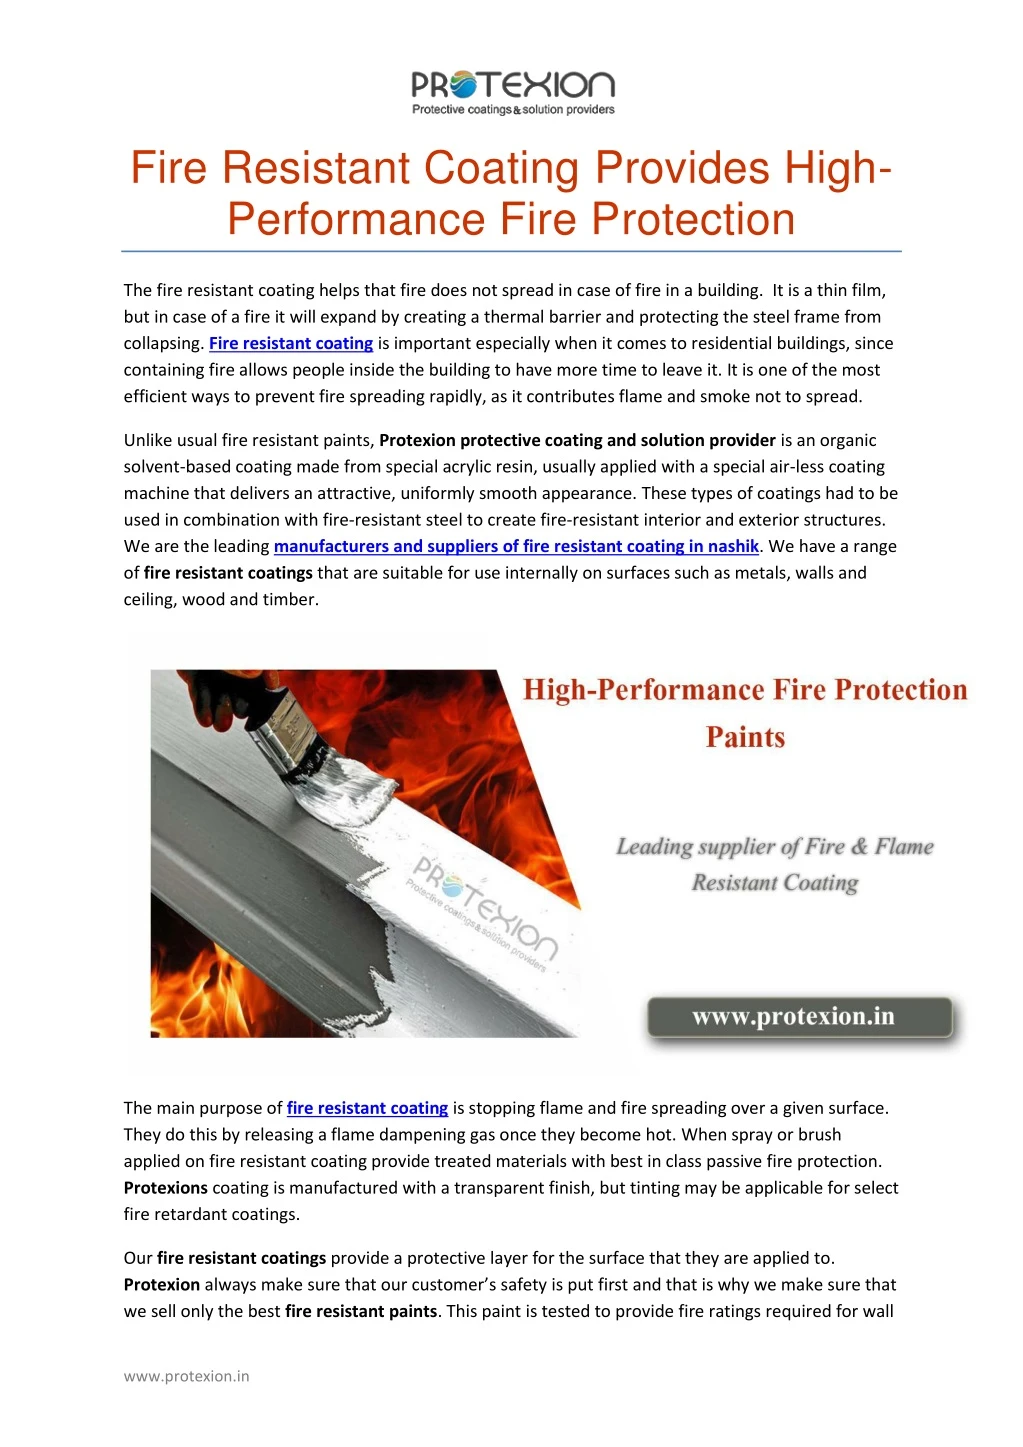 fire resistant coating provides high performance